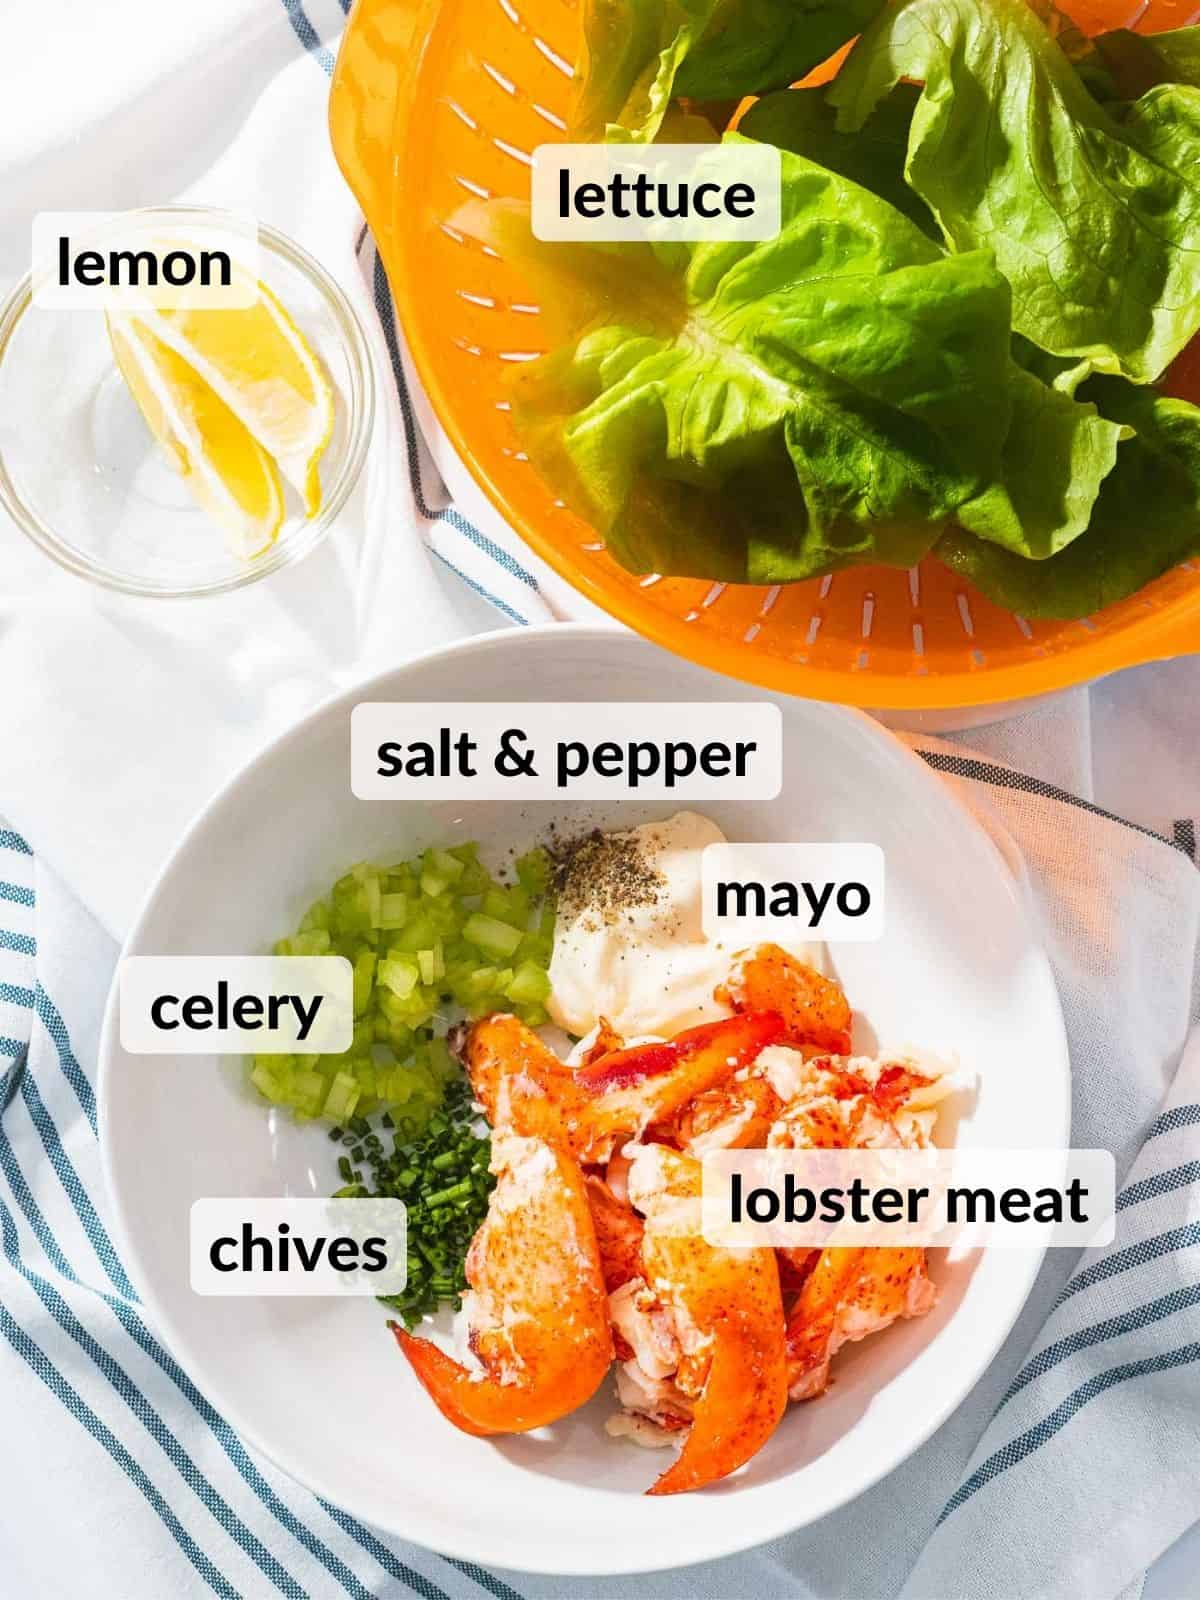 Ingredients for lobster salad including lobster meat, lettuce, and mayo.